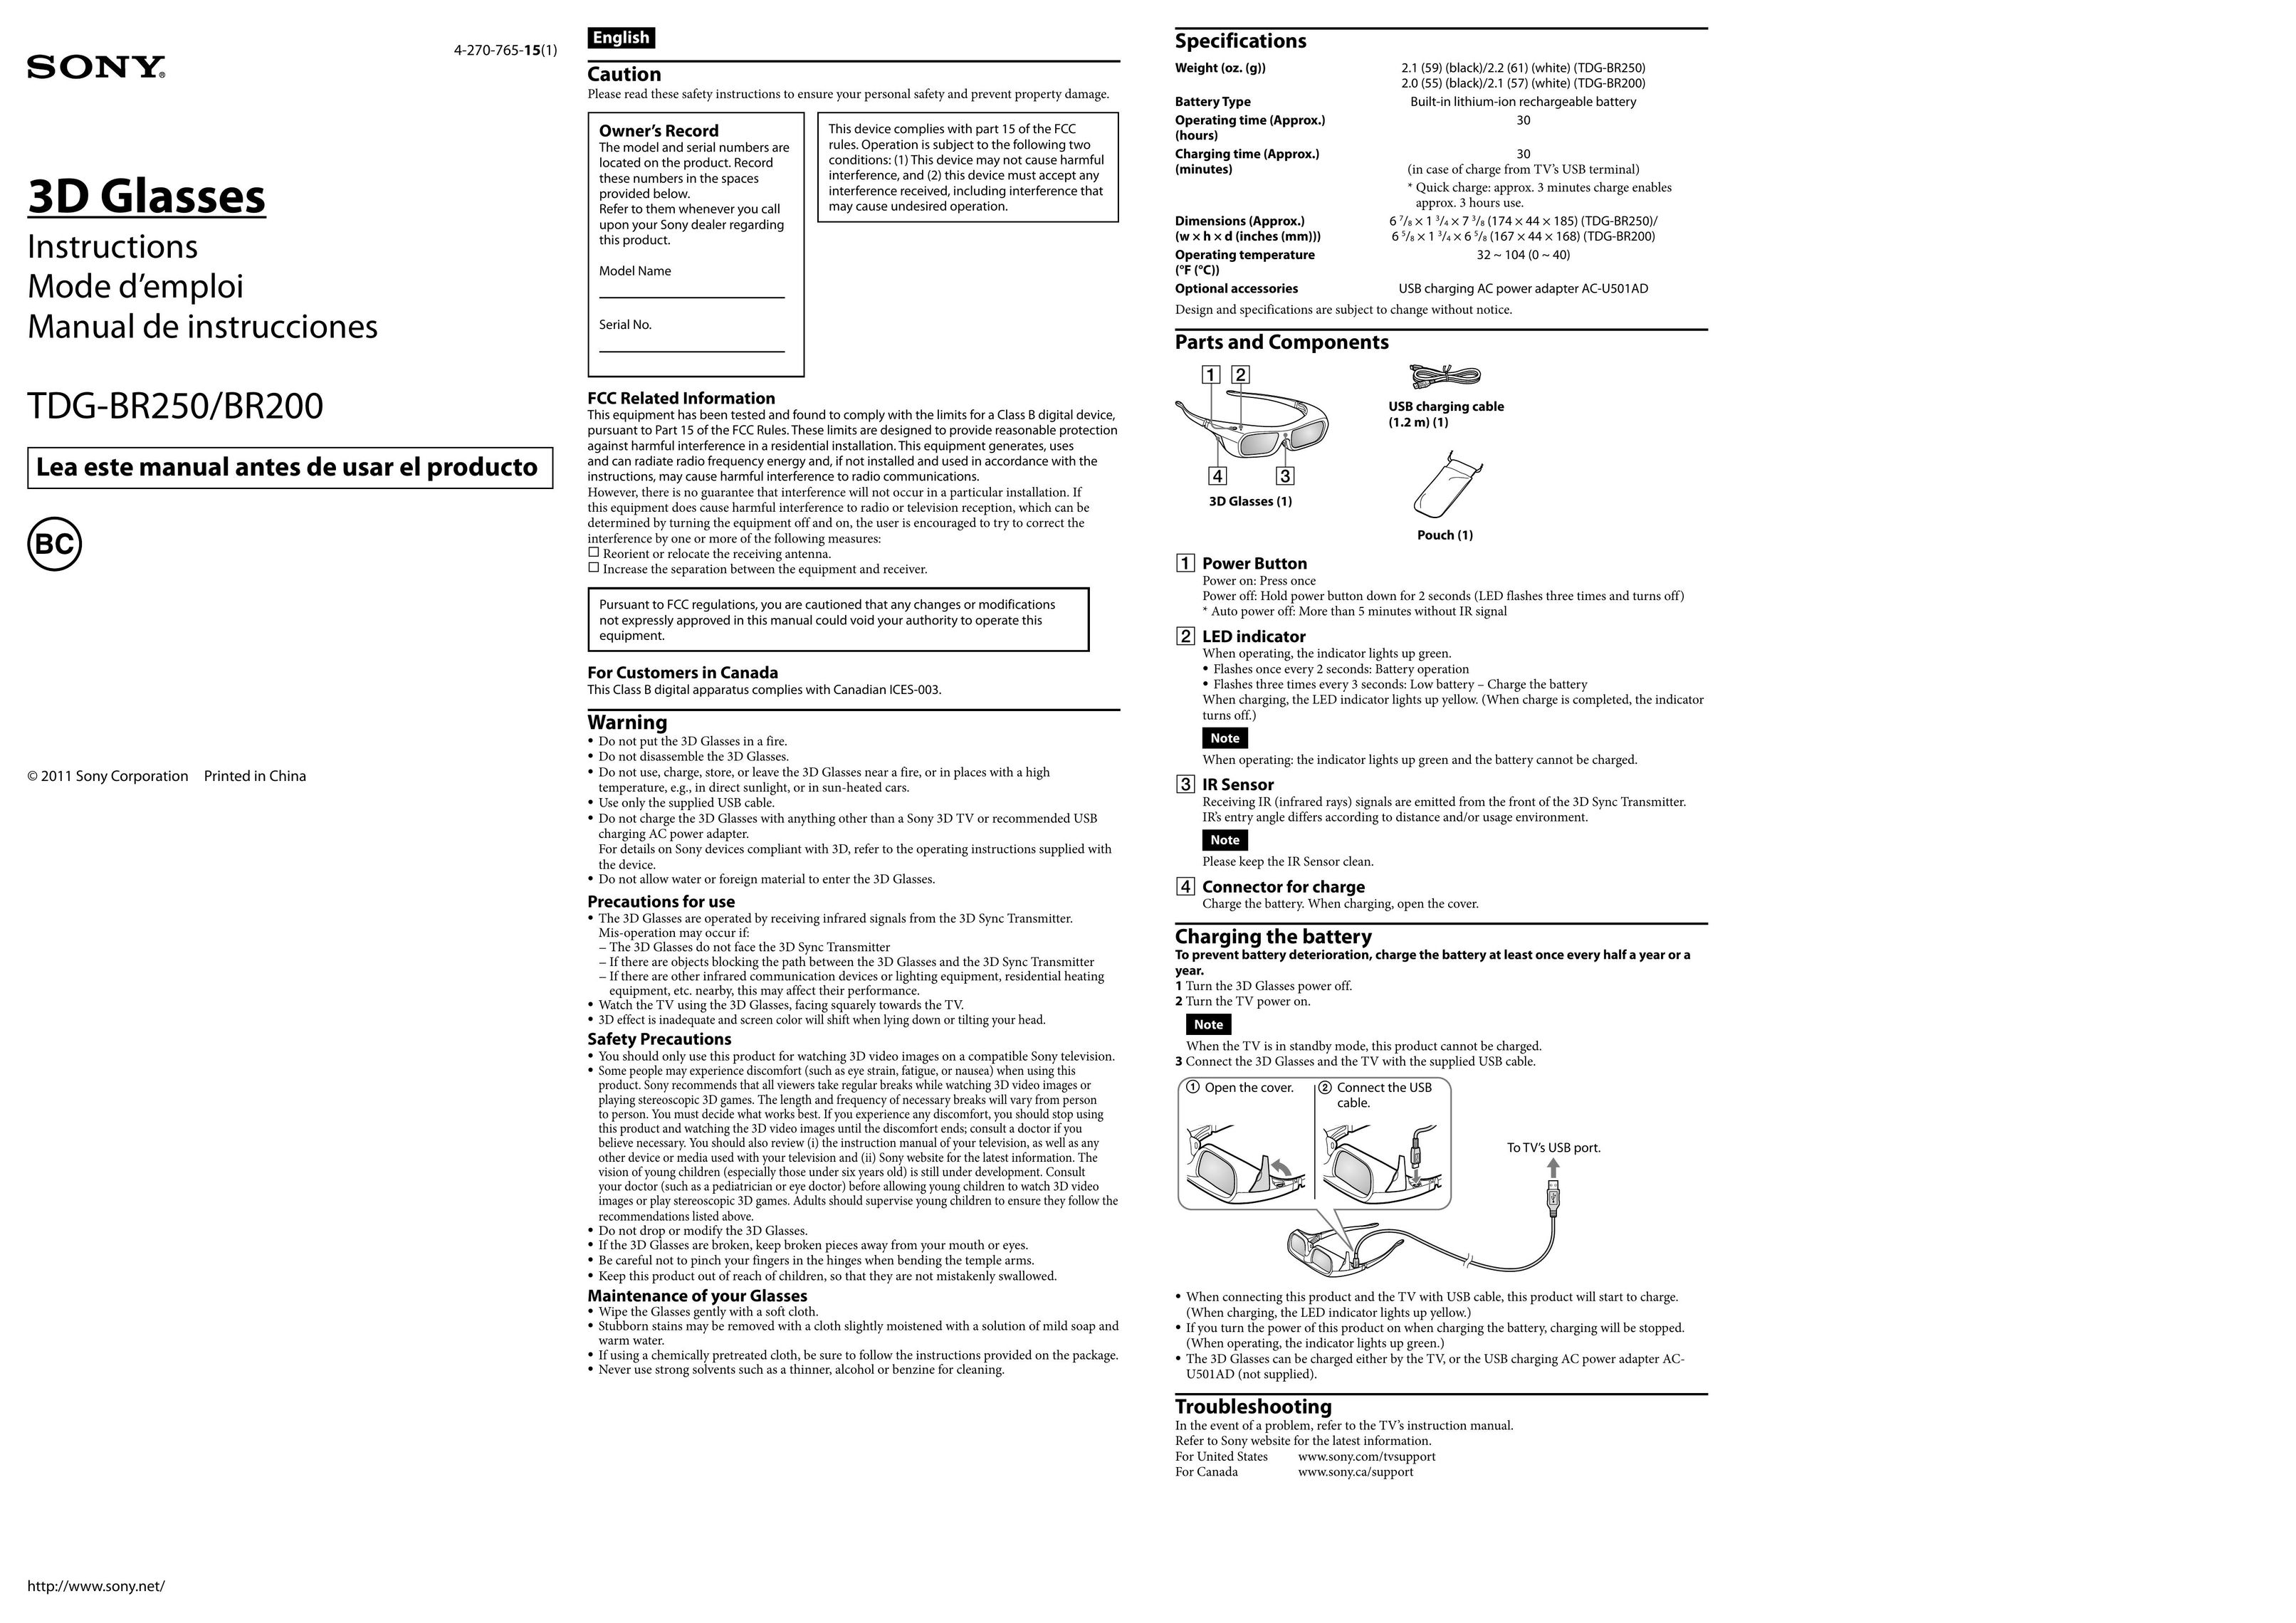 Sony TDG-BR200 TV Video Accessories User Manual